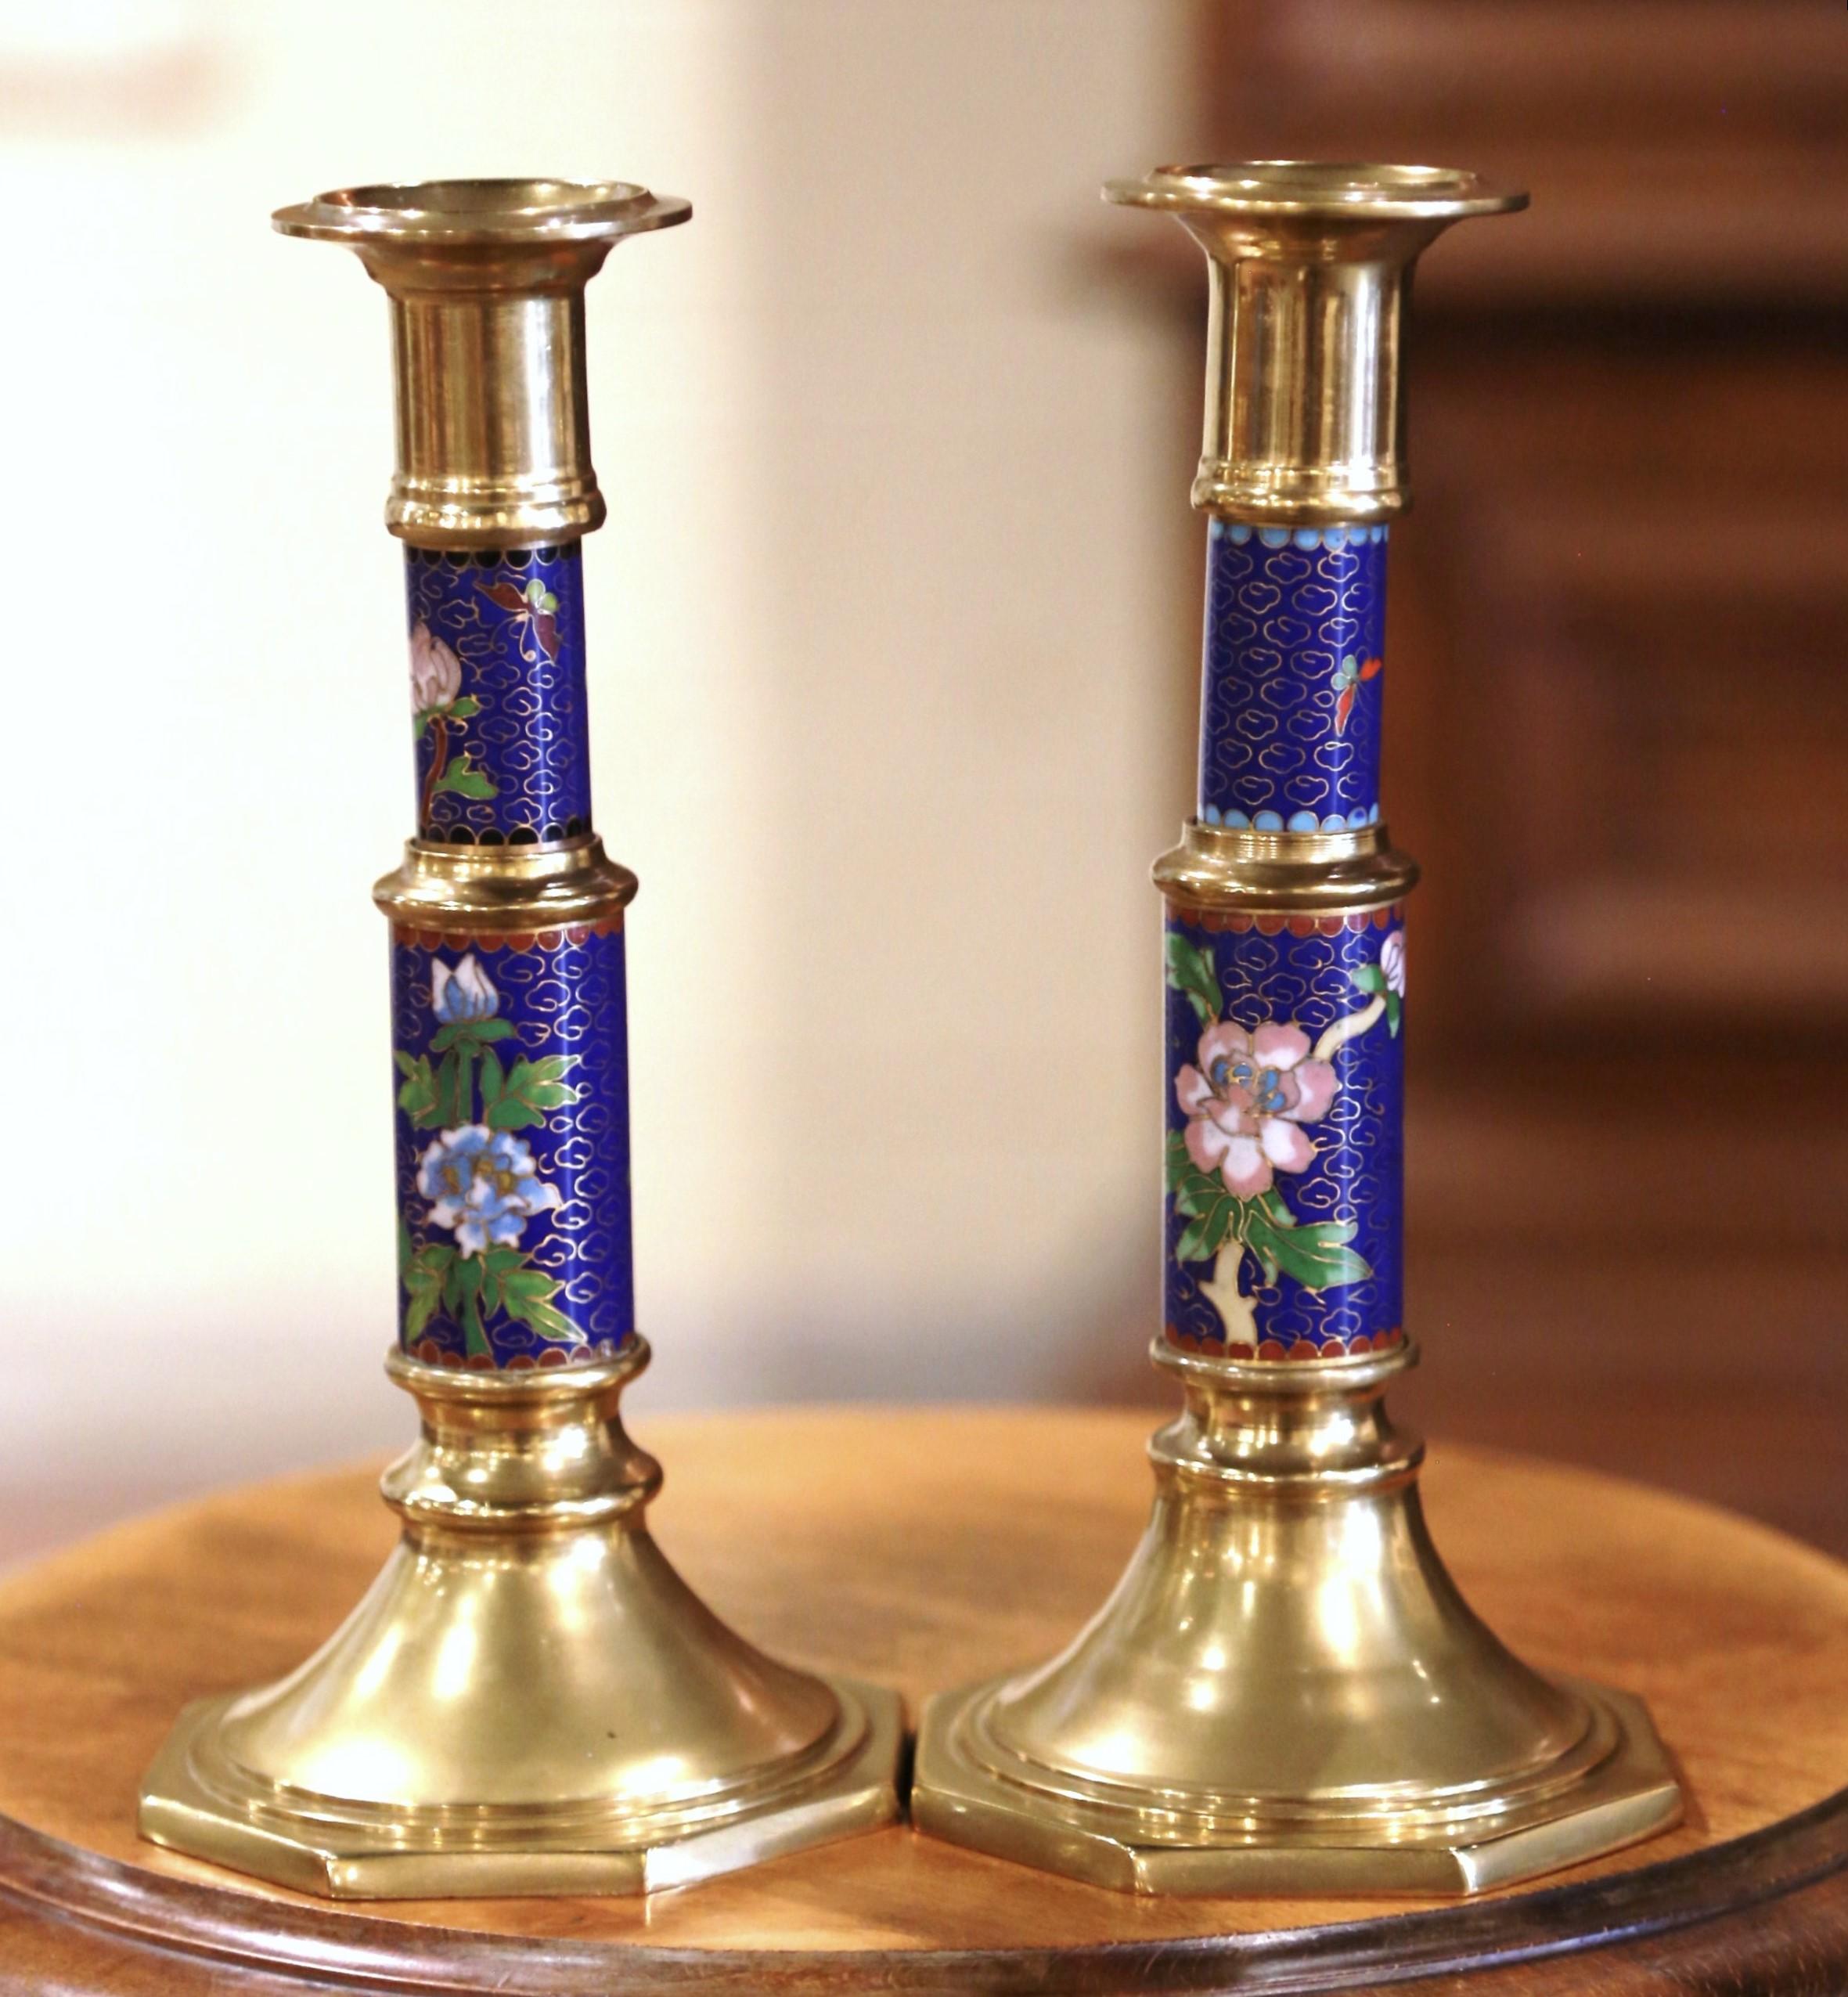 Pair of Vintage Brass Champleve Candle Holders with Floral & Leaf Motifs In Excellent Condition For Sale In Dallas, TX